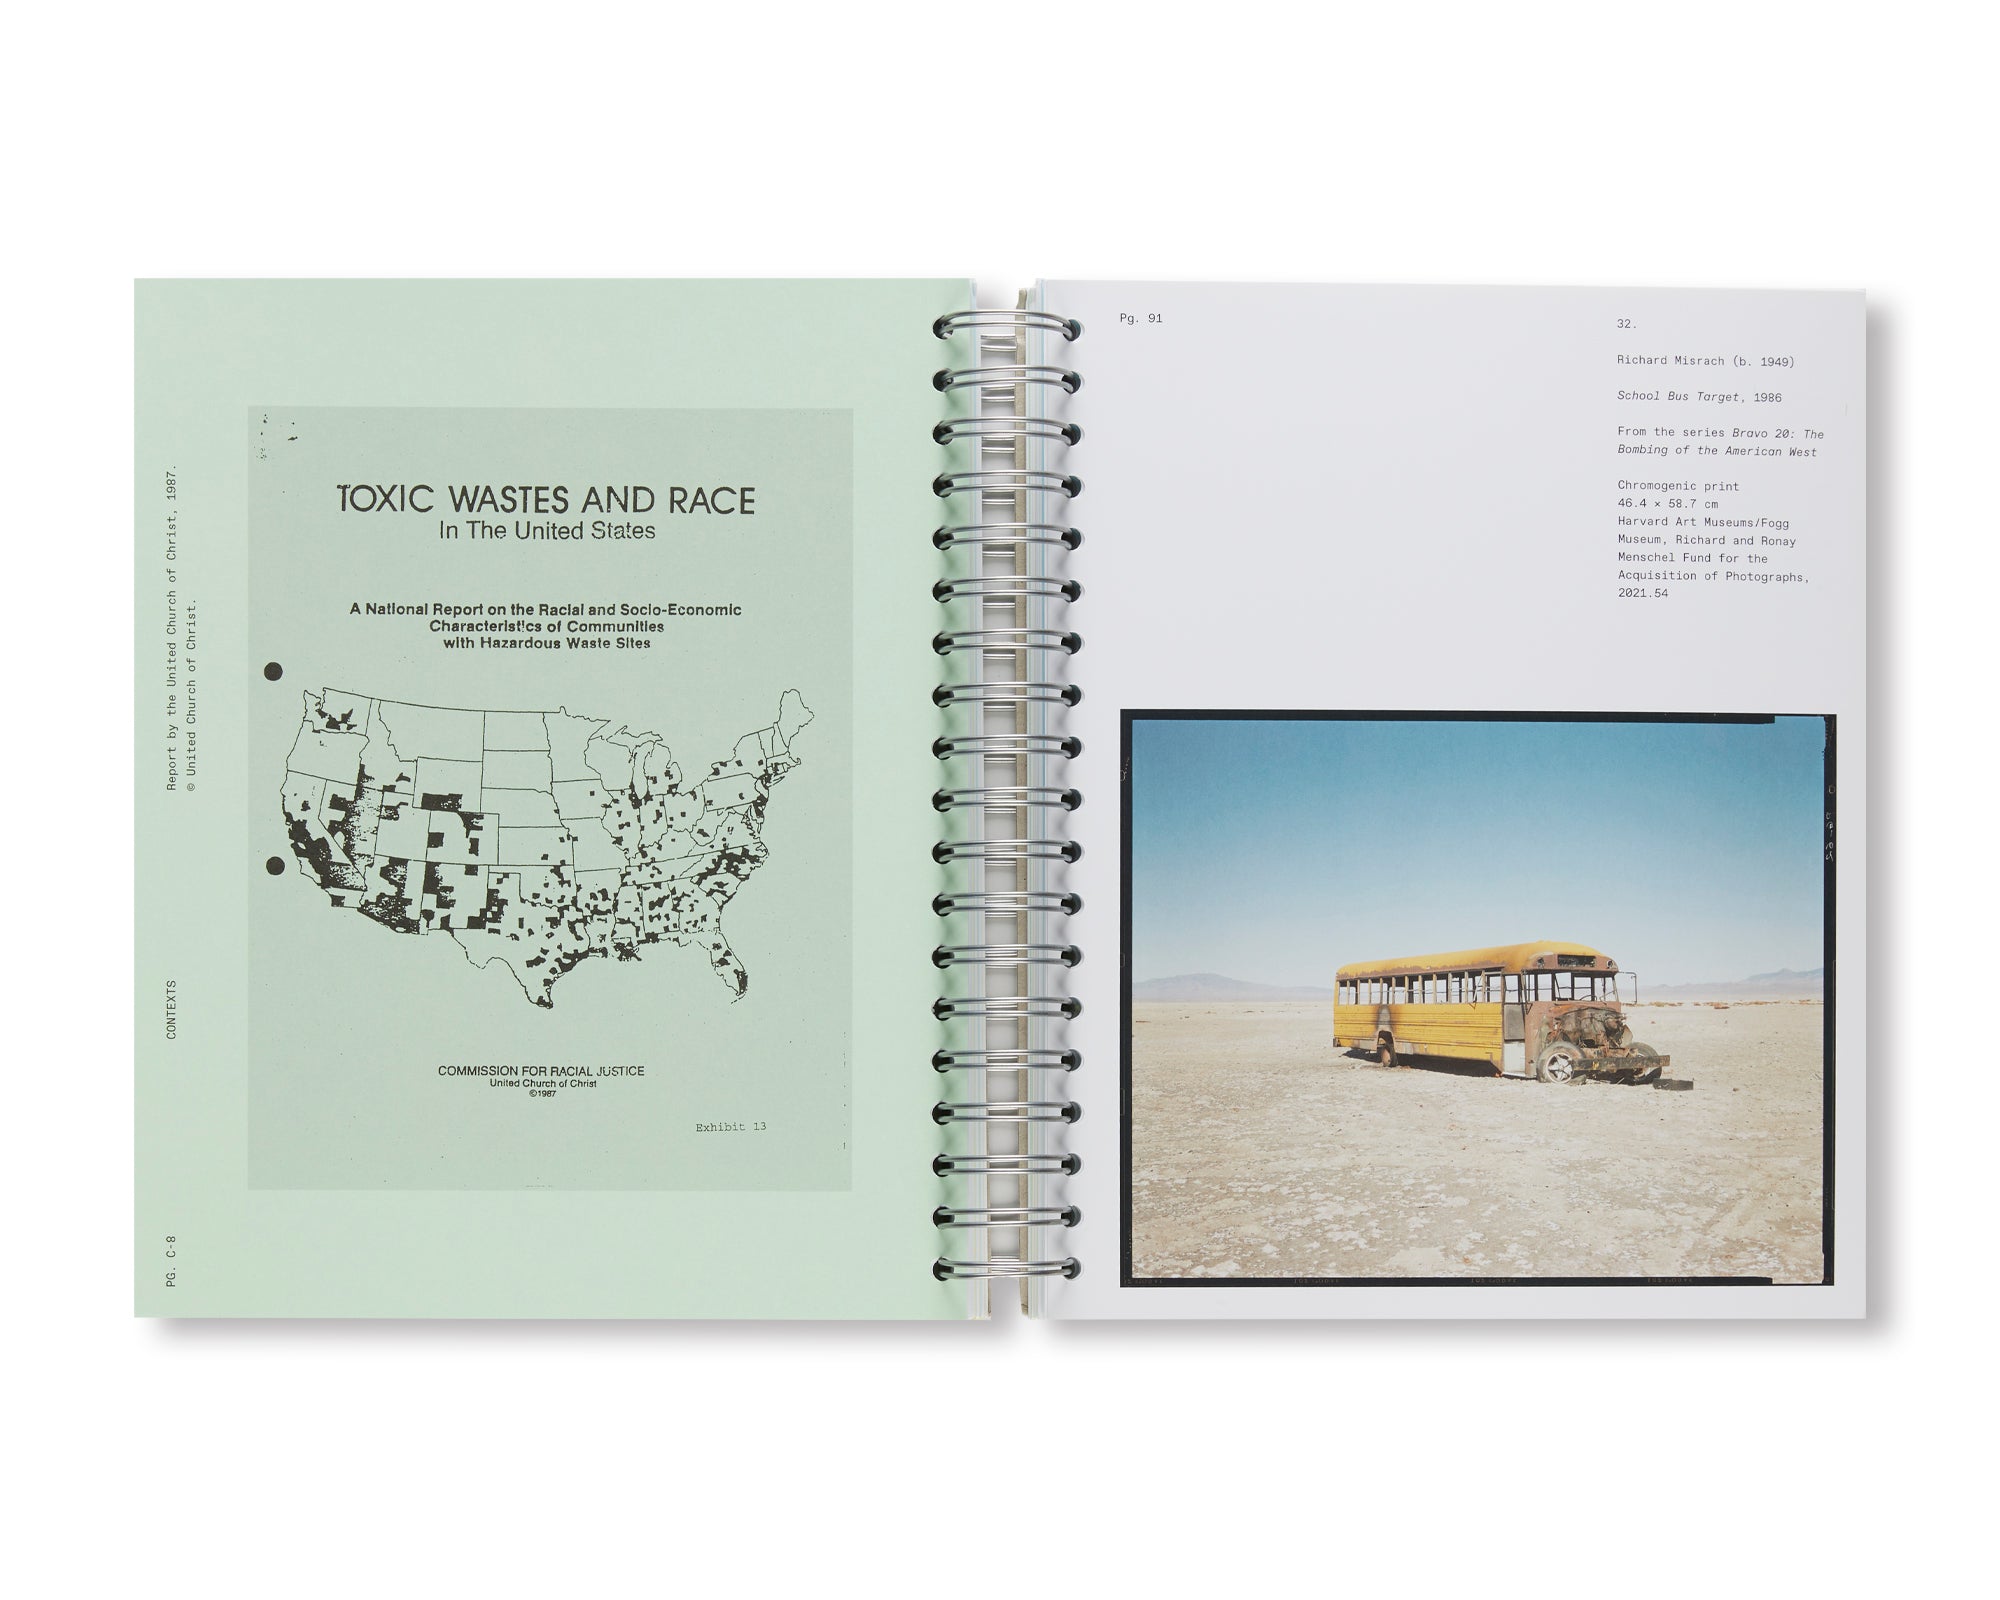 DEVOUR THE LAND: WAR AND AMERICAN LANDSCAPE PHOTOGRAPHY SINCE 1970